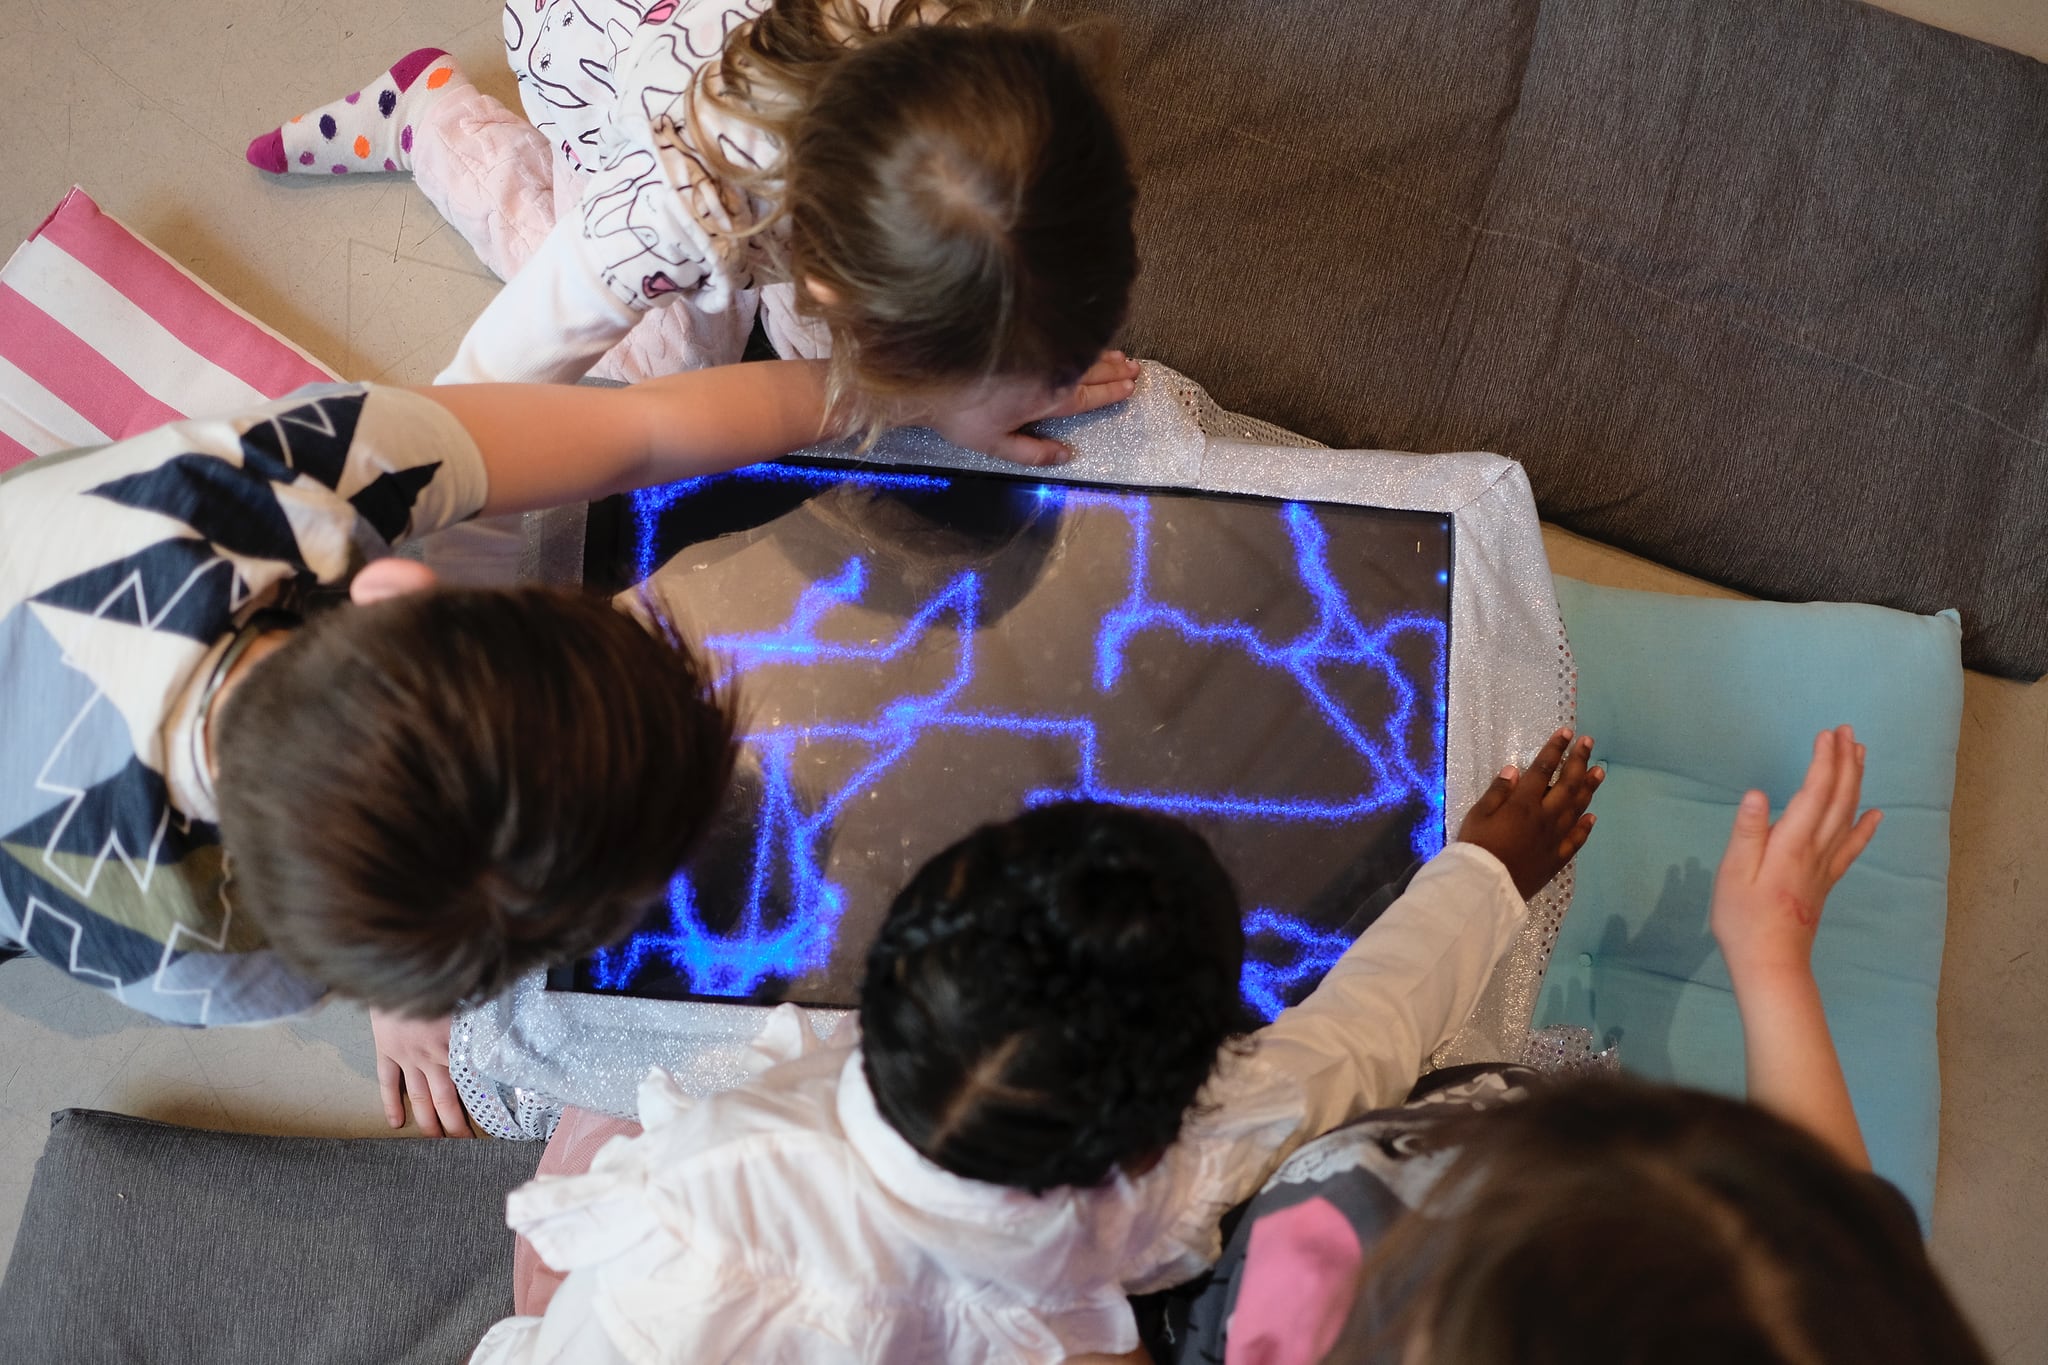 Kids hovering their hands over the edges of a screen displaying drawings from lines of stardust